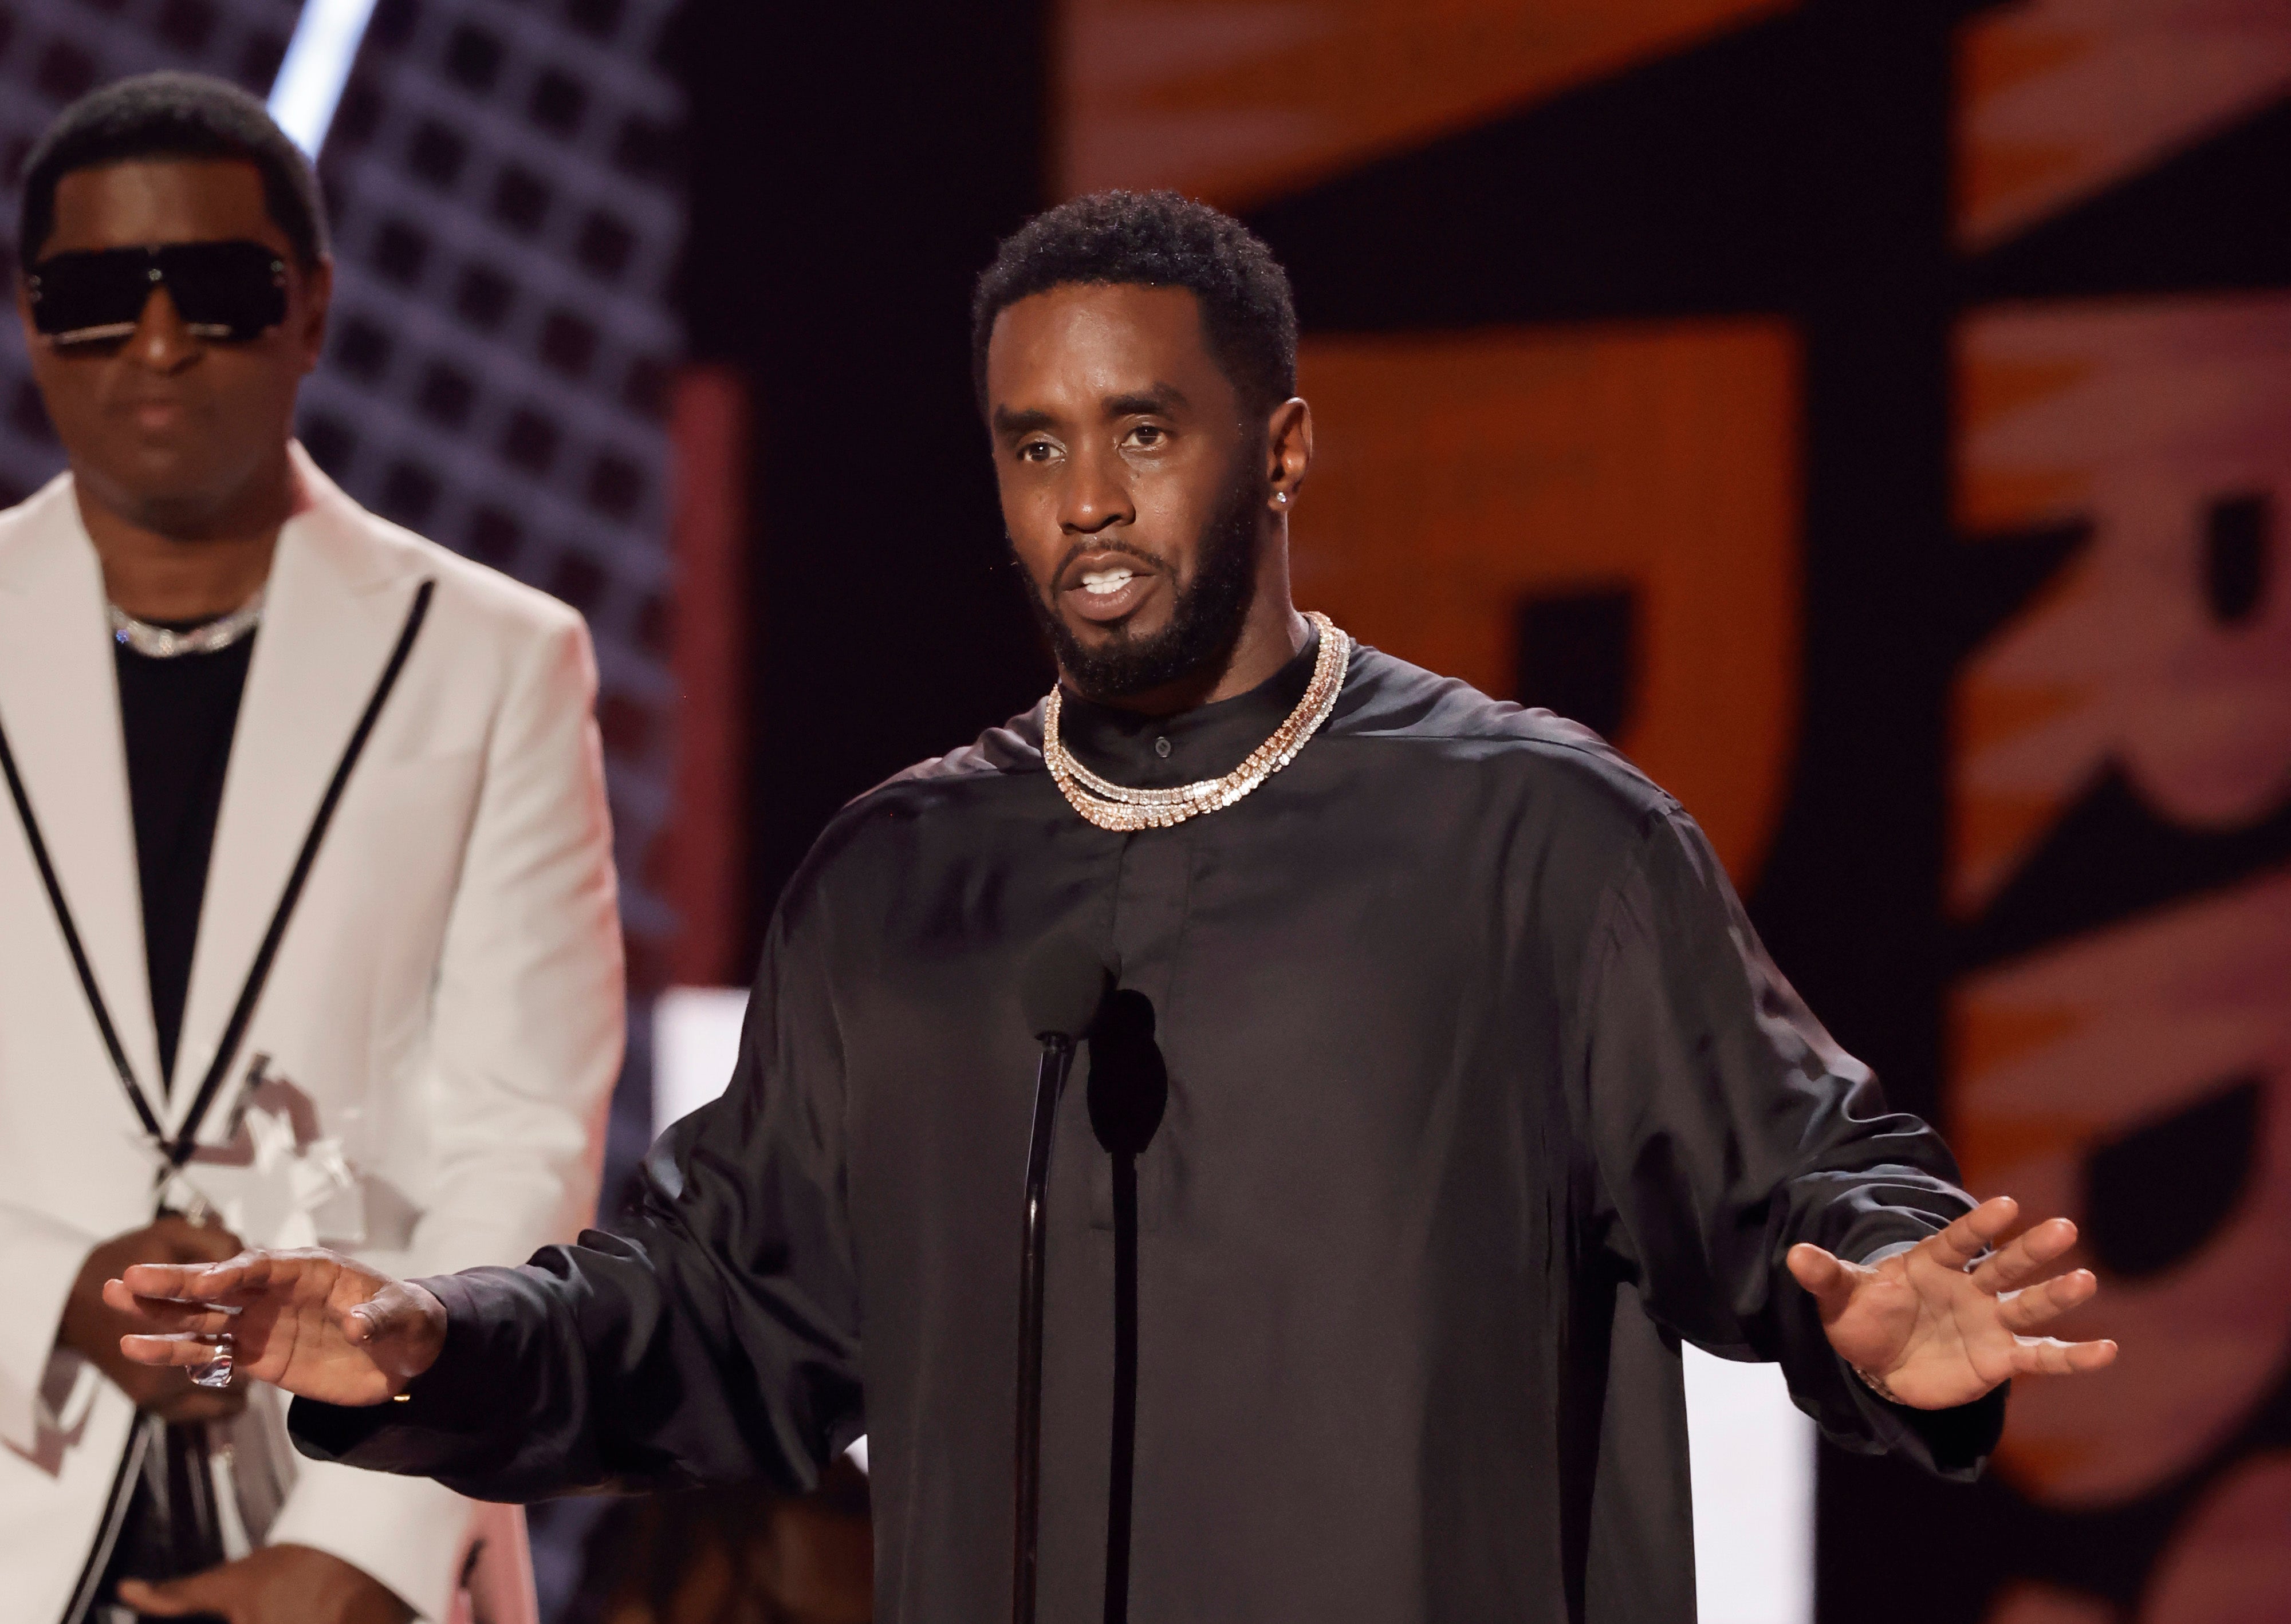 Music mogul Sean ‘Diddy’ Combs has been accused of sex trafficking and sexual assault among other things